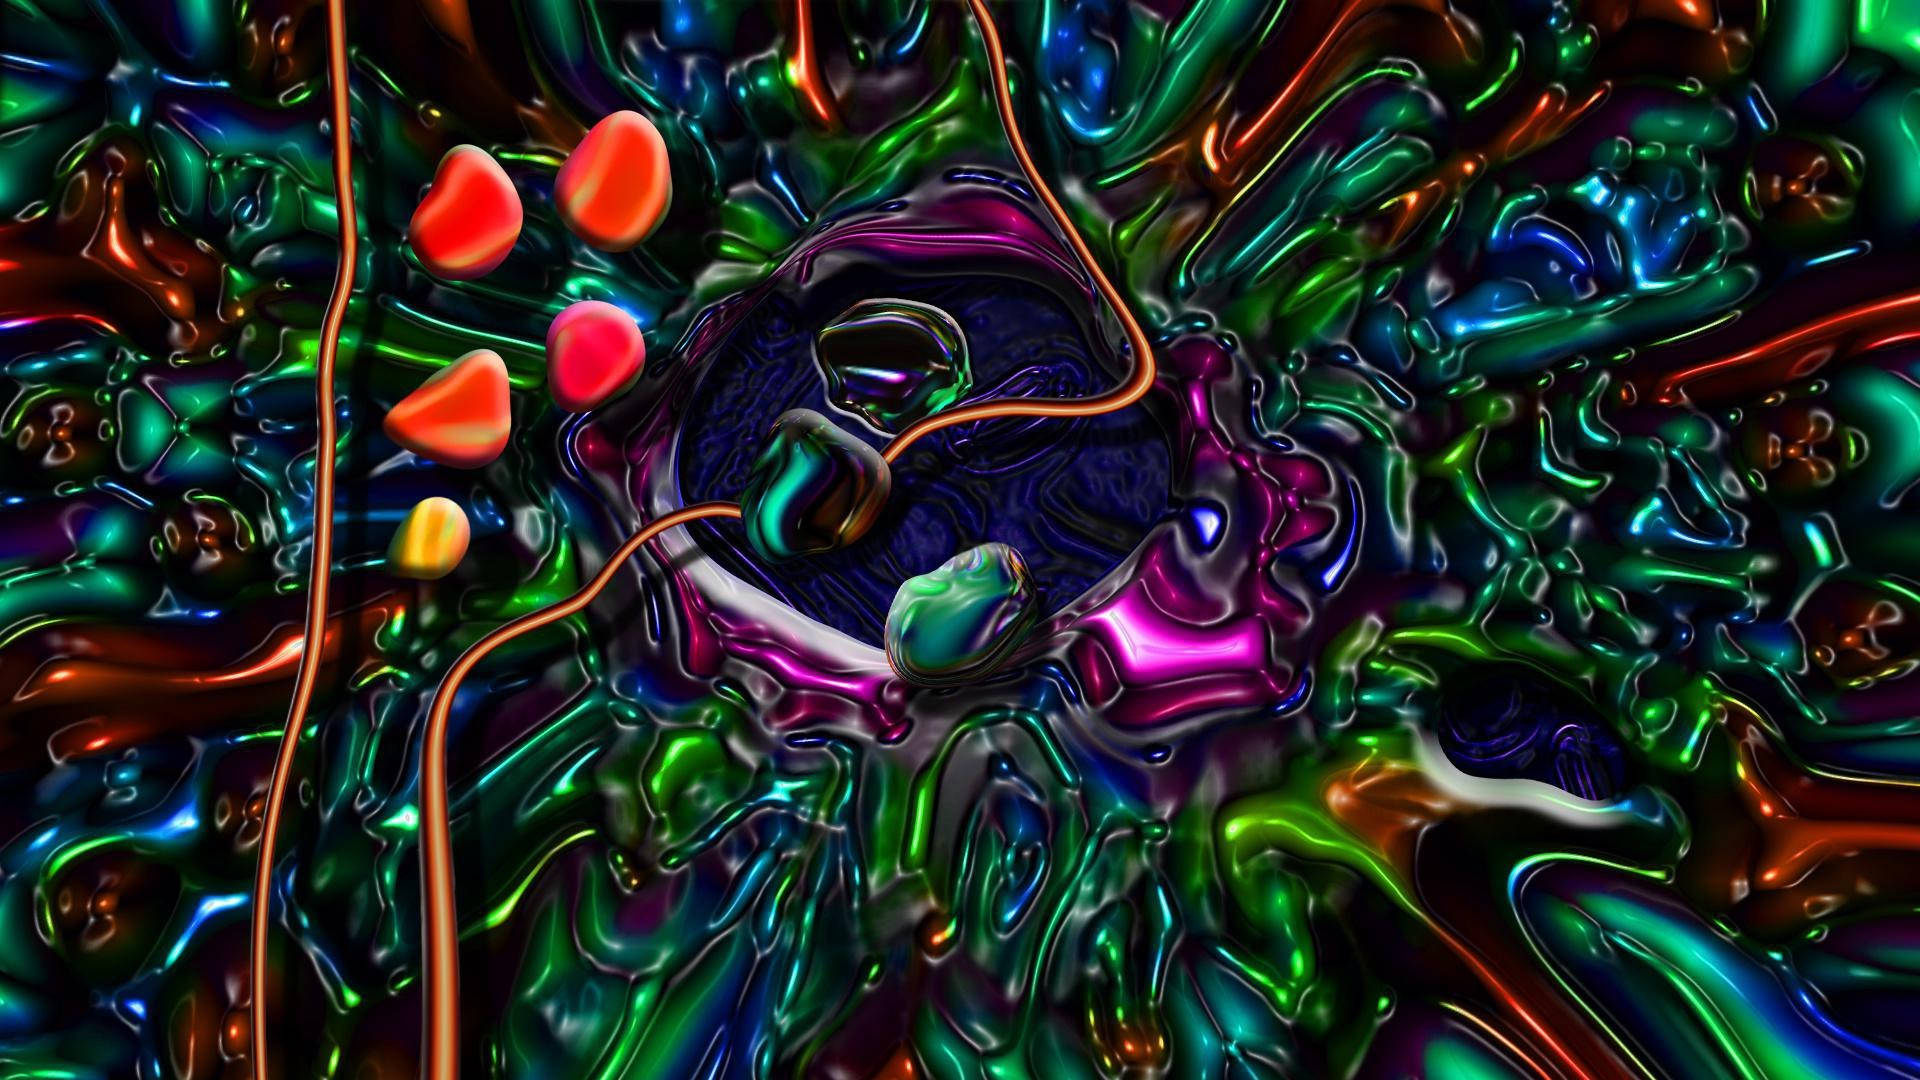 Hd Psychedelic Cell Background Wallpaper